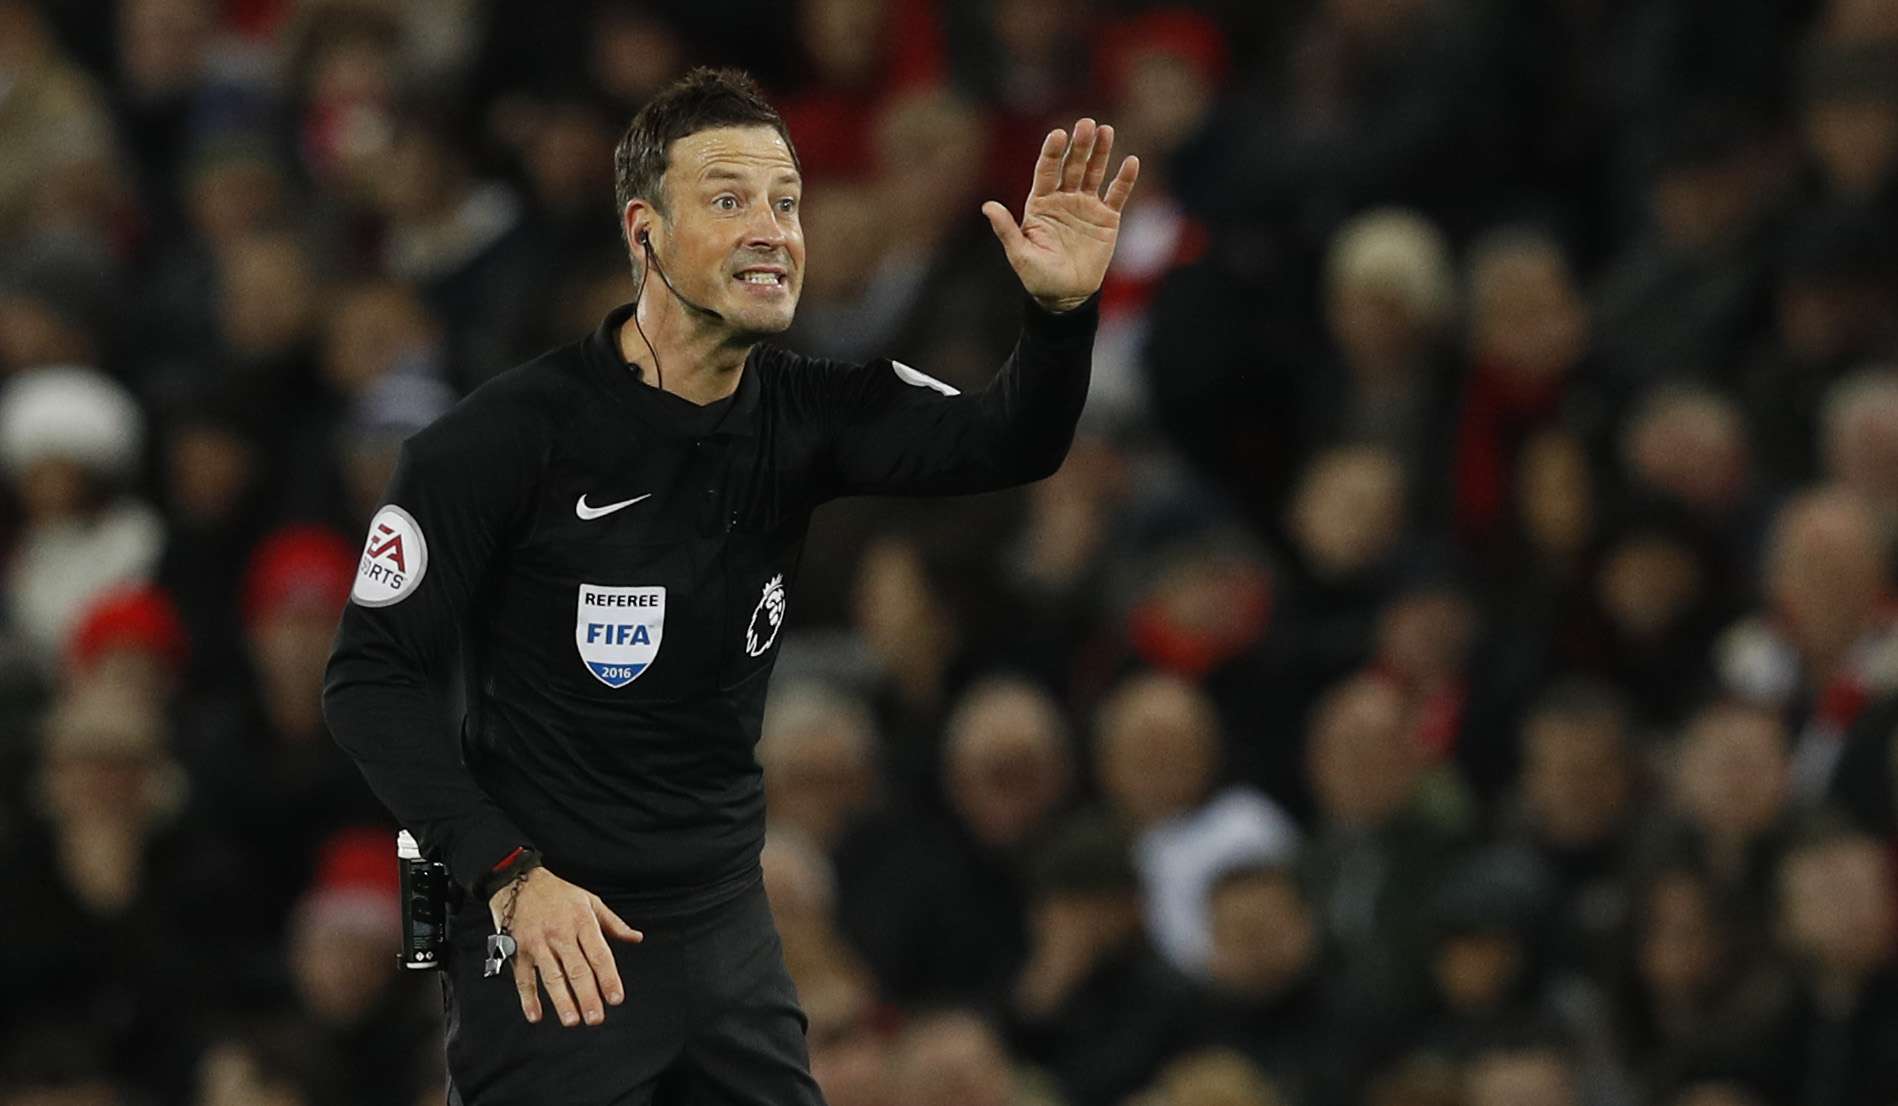 The Chinese Super League is hoping to lure referee Mark Clattenburg. Photo: Reuters